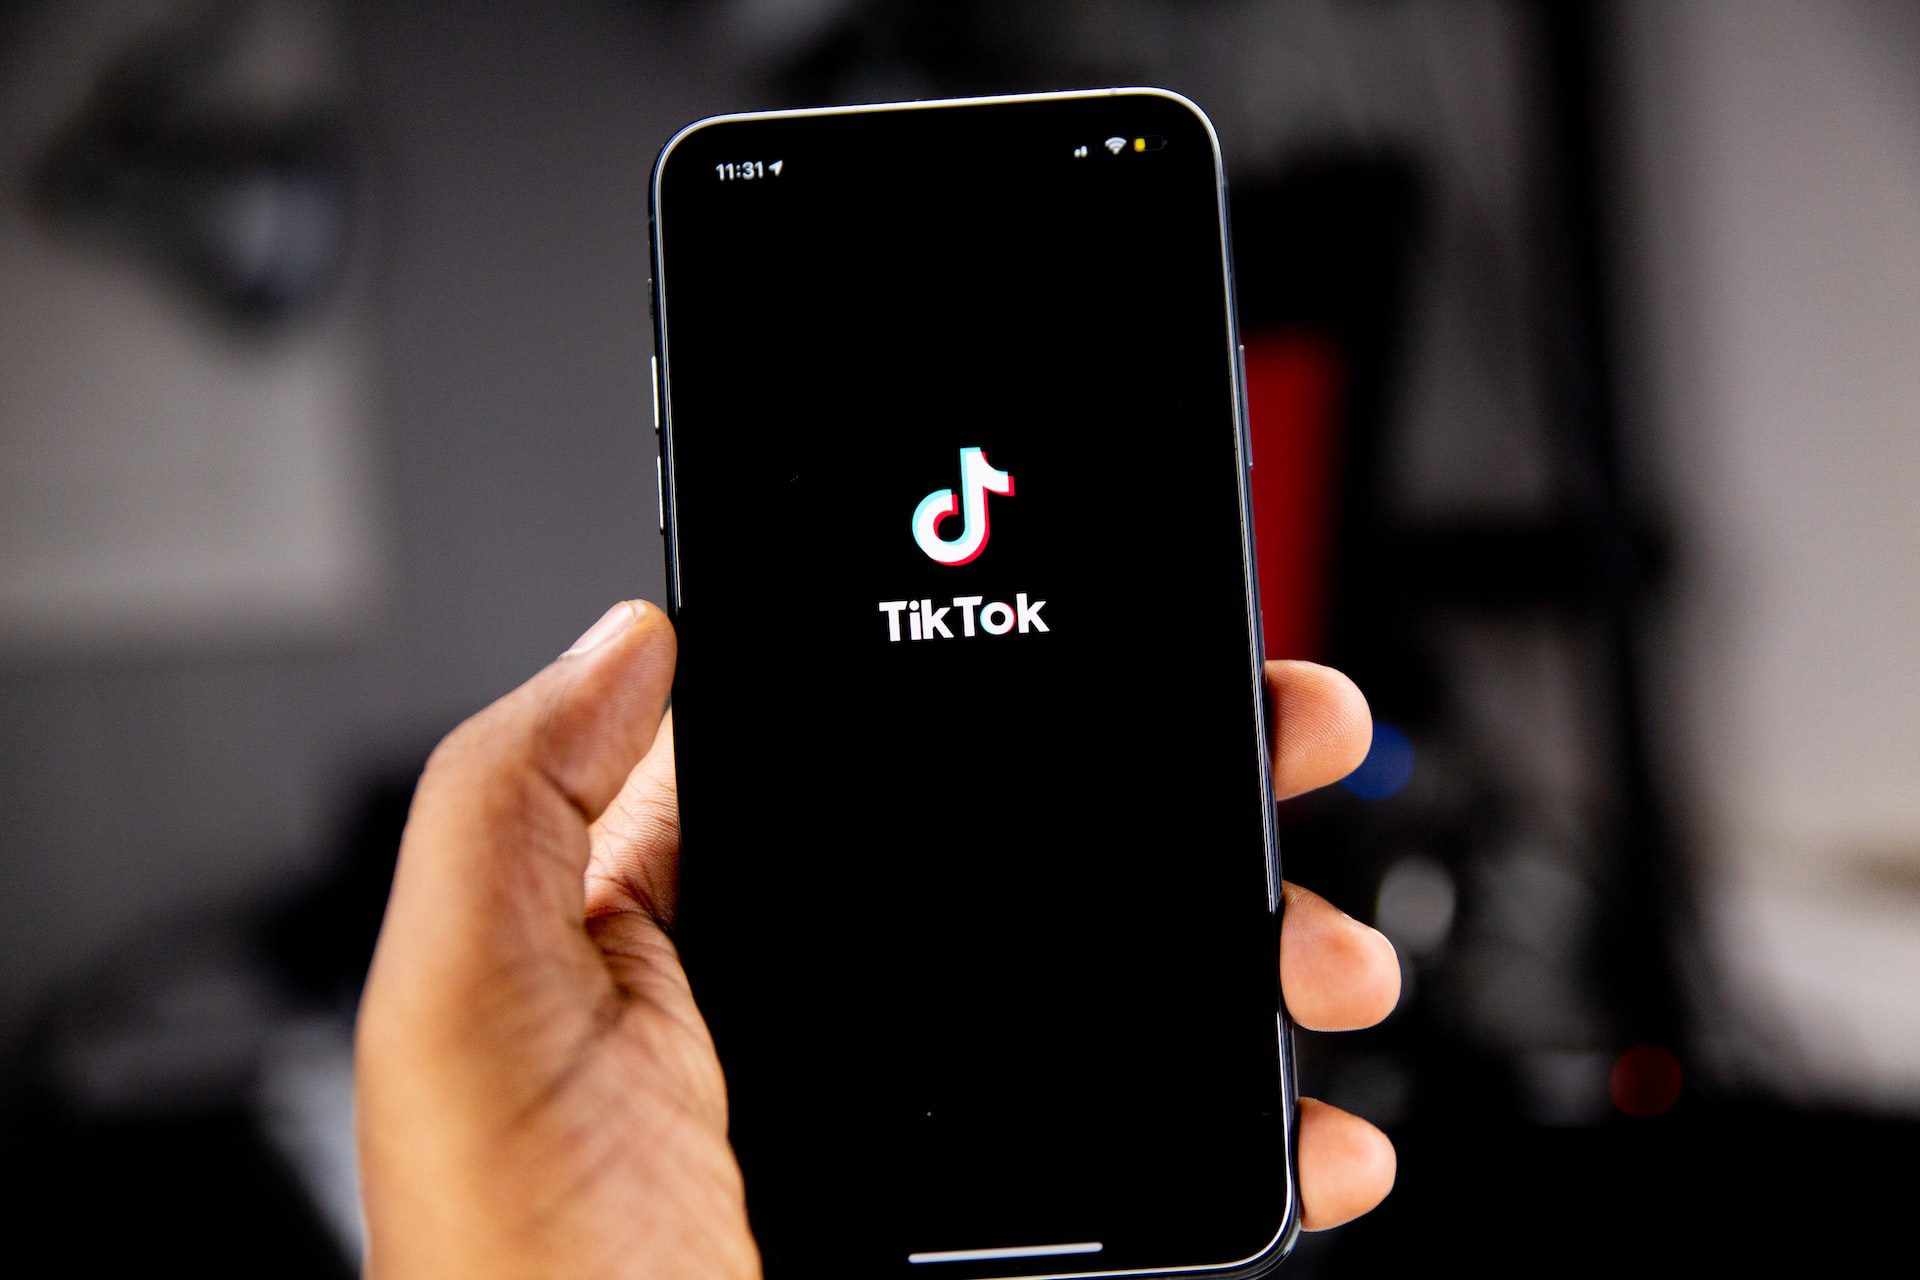 What To Do If TikTok Gets Banned